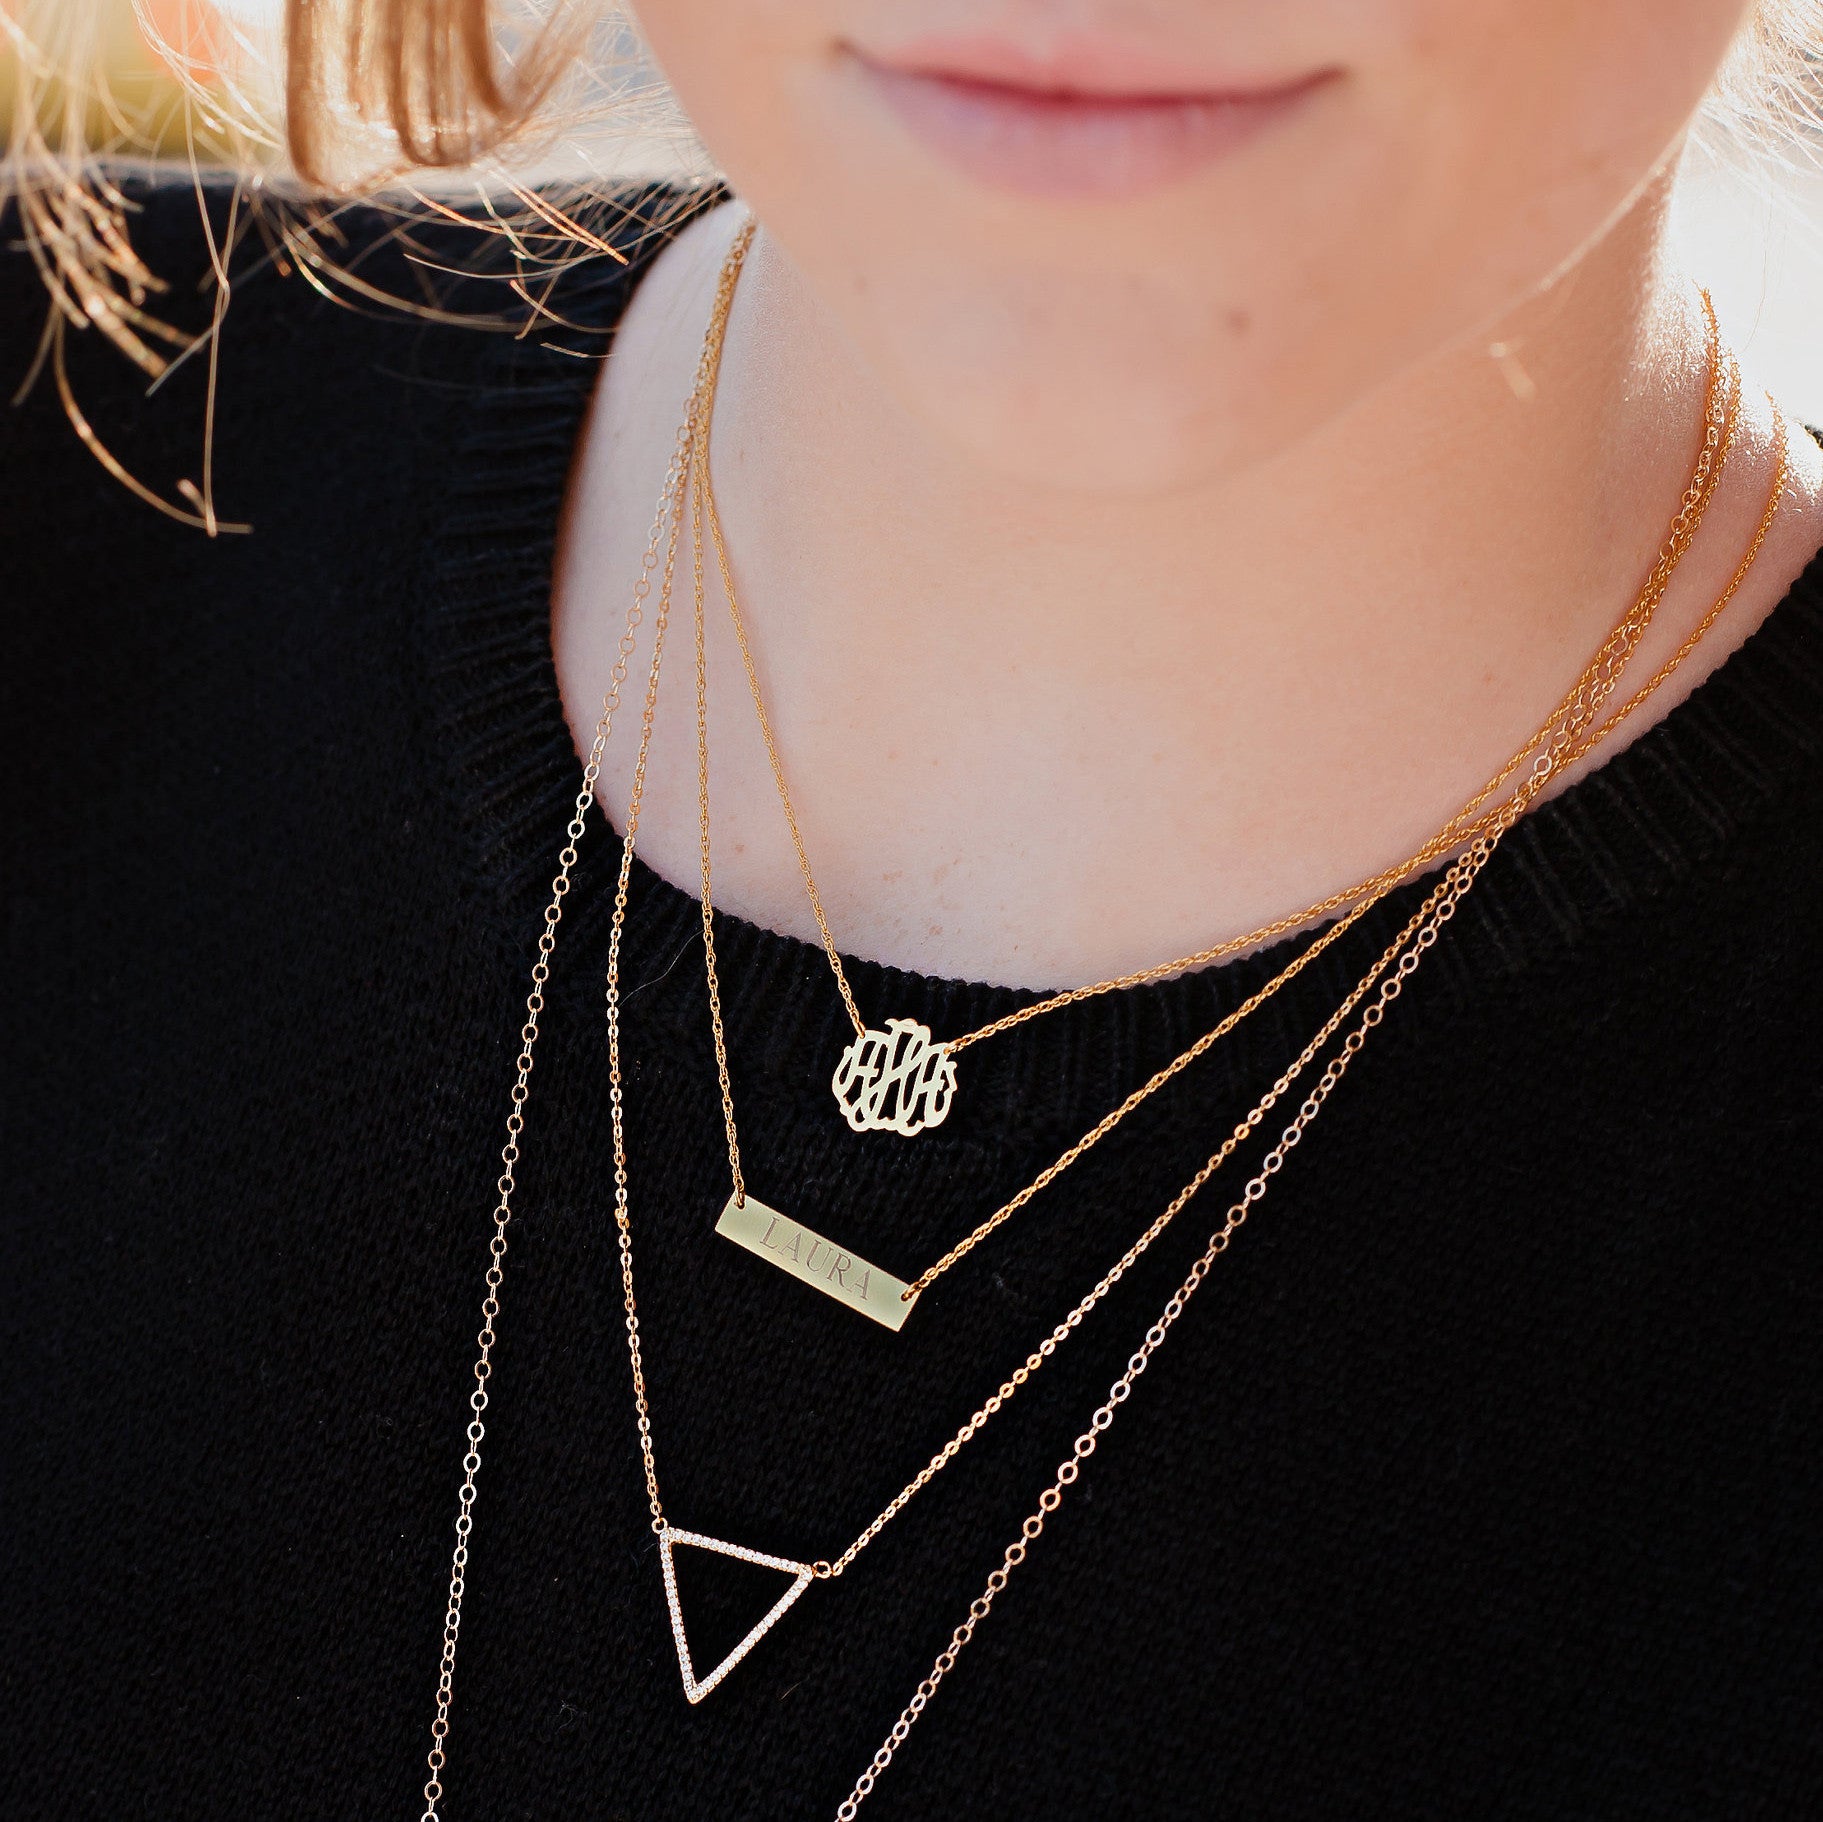 I found this at #moonandlola - Engraved Bar Necklace on model